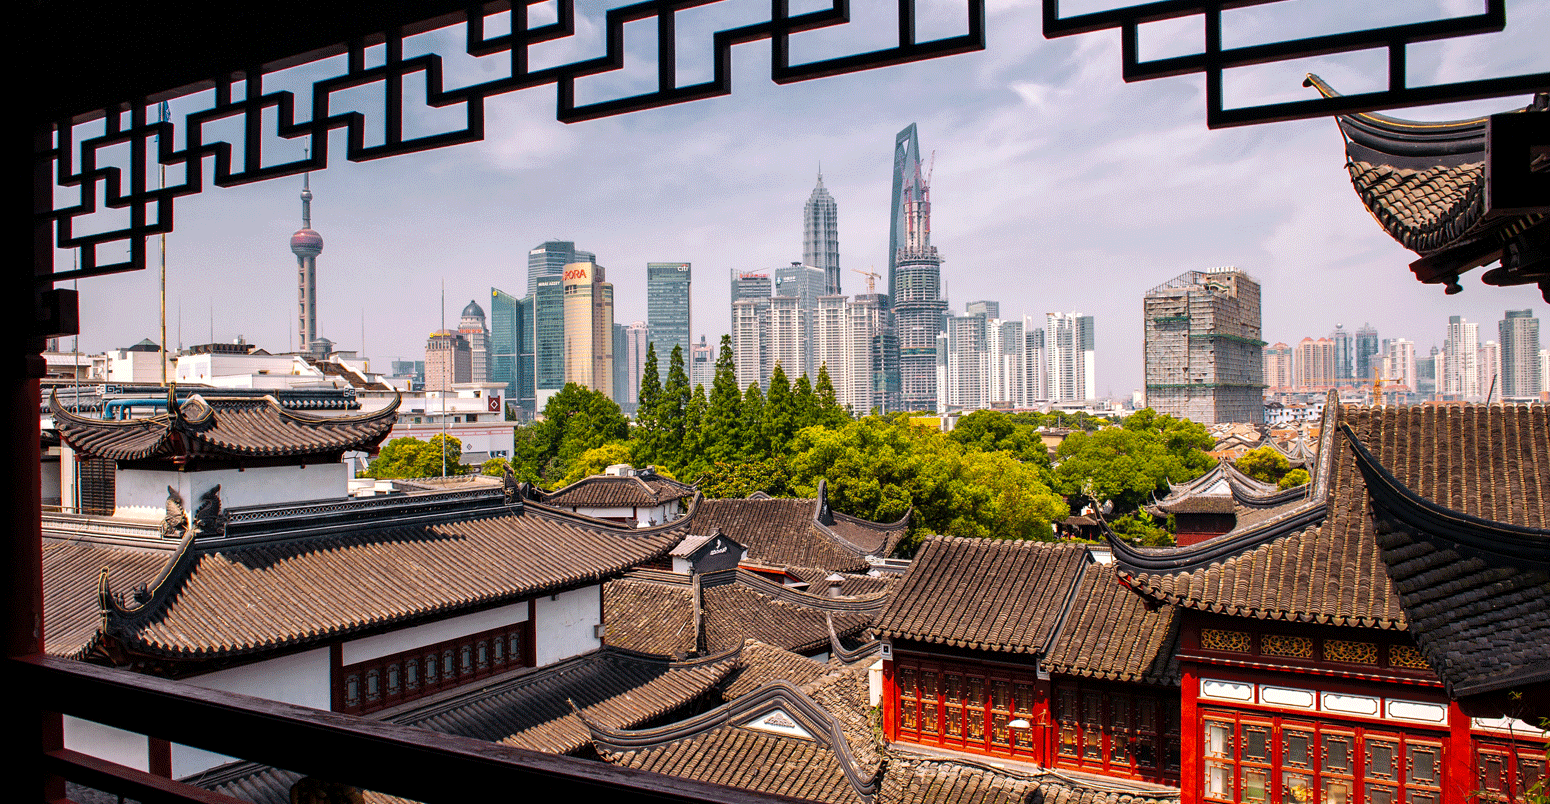 Old and modern China viewed from a tea house in old town, Shanghai